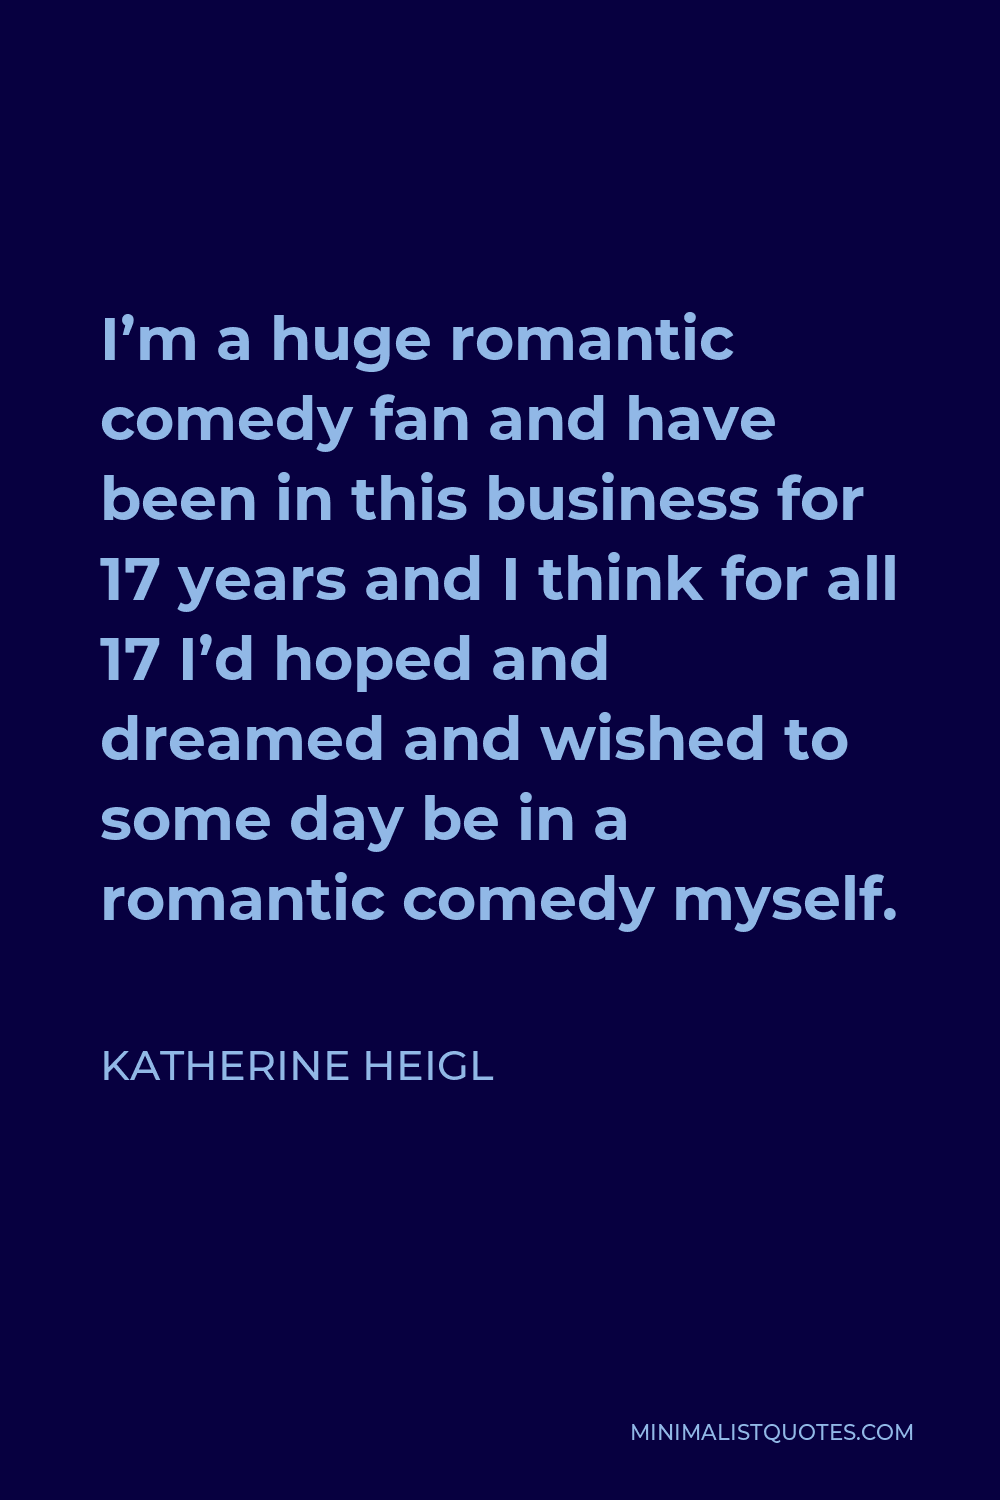 Katherine Heigl Quote - I’m a huge romantic comedy fan and have been in this business for 17 years and I think for all 17 I’d hoped and dreamed and wished to some day be in a romantic comedy myself.